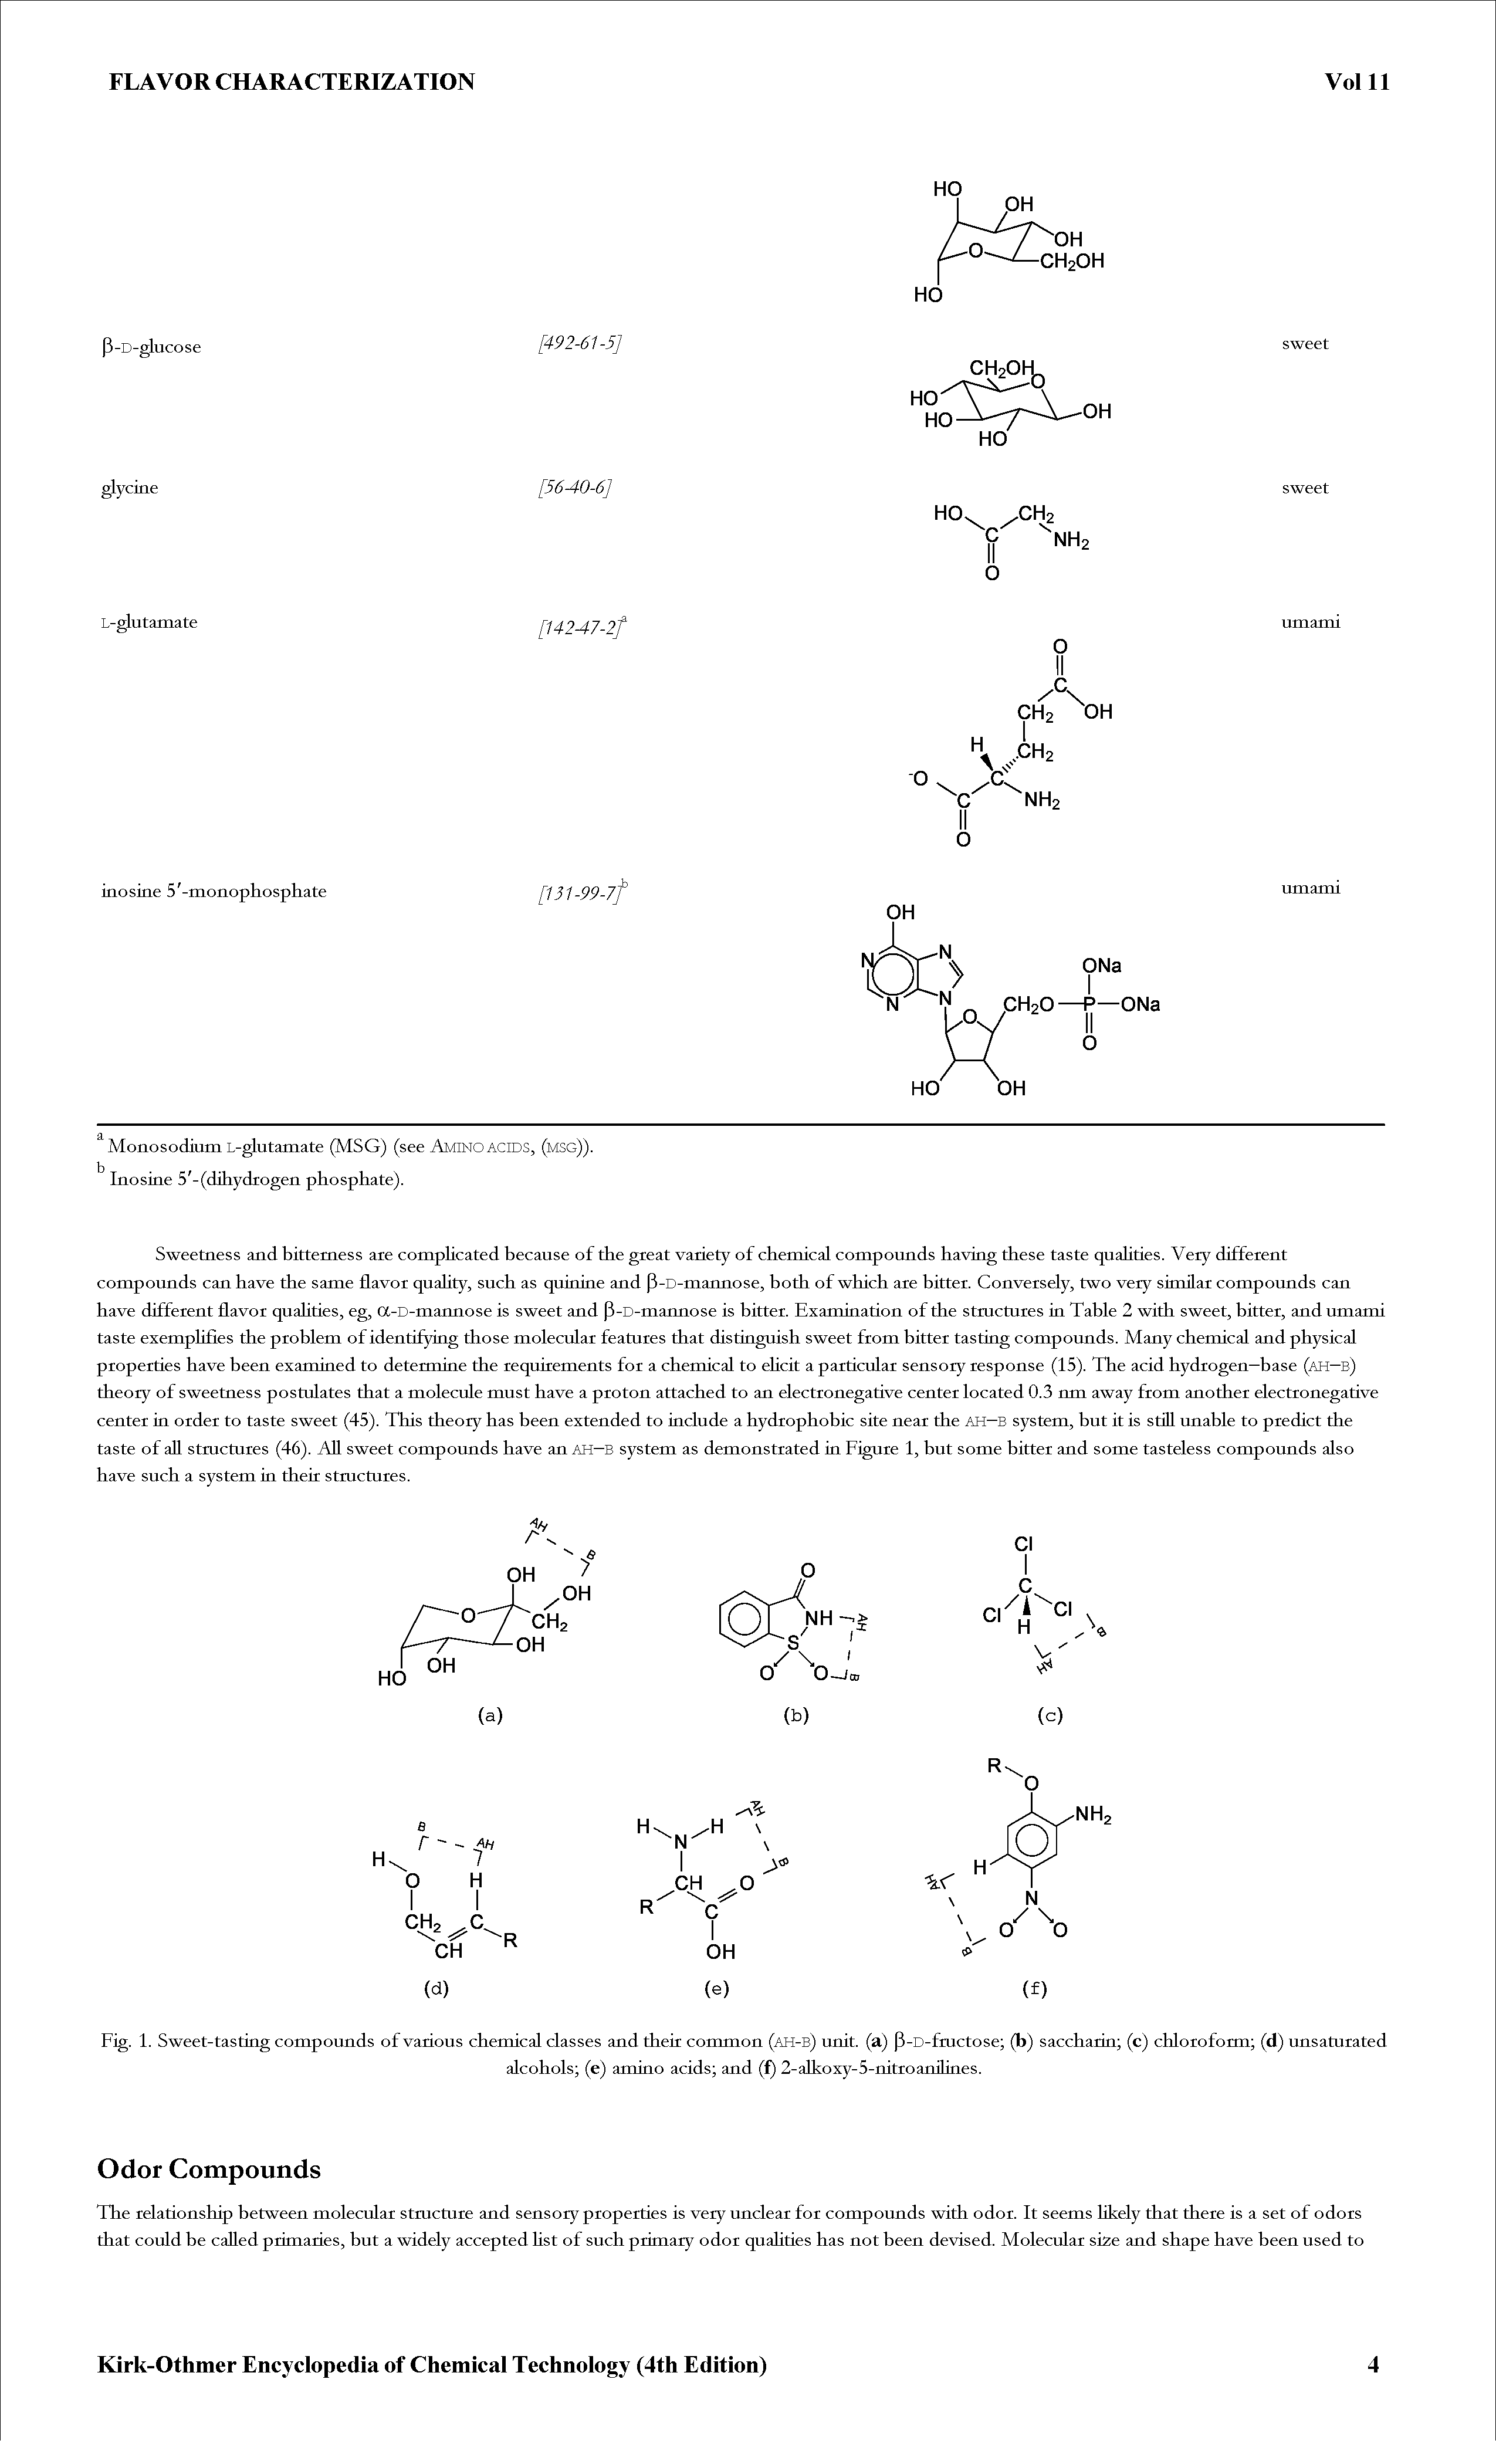 Fig. 1. Sweet-tasting compounds of various chemical classes and their common (ah-b) unit, (a) P-D-fmctose (b) saccharin (c) chloroform (d) unsaturated...